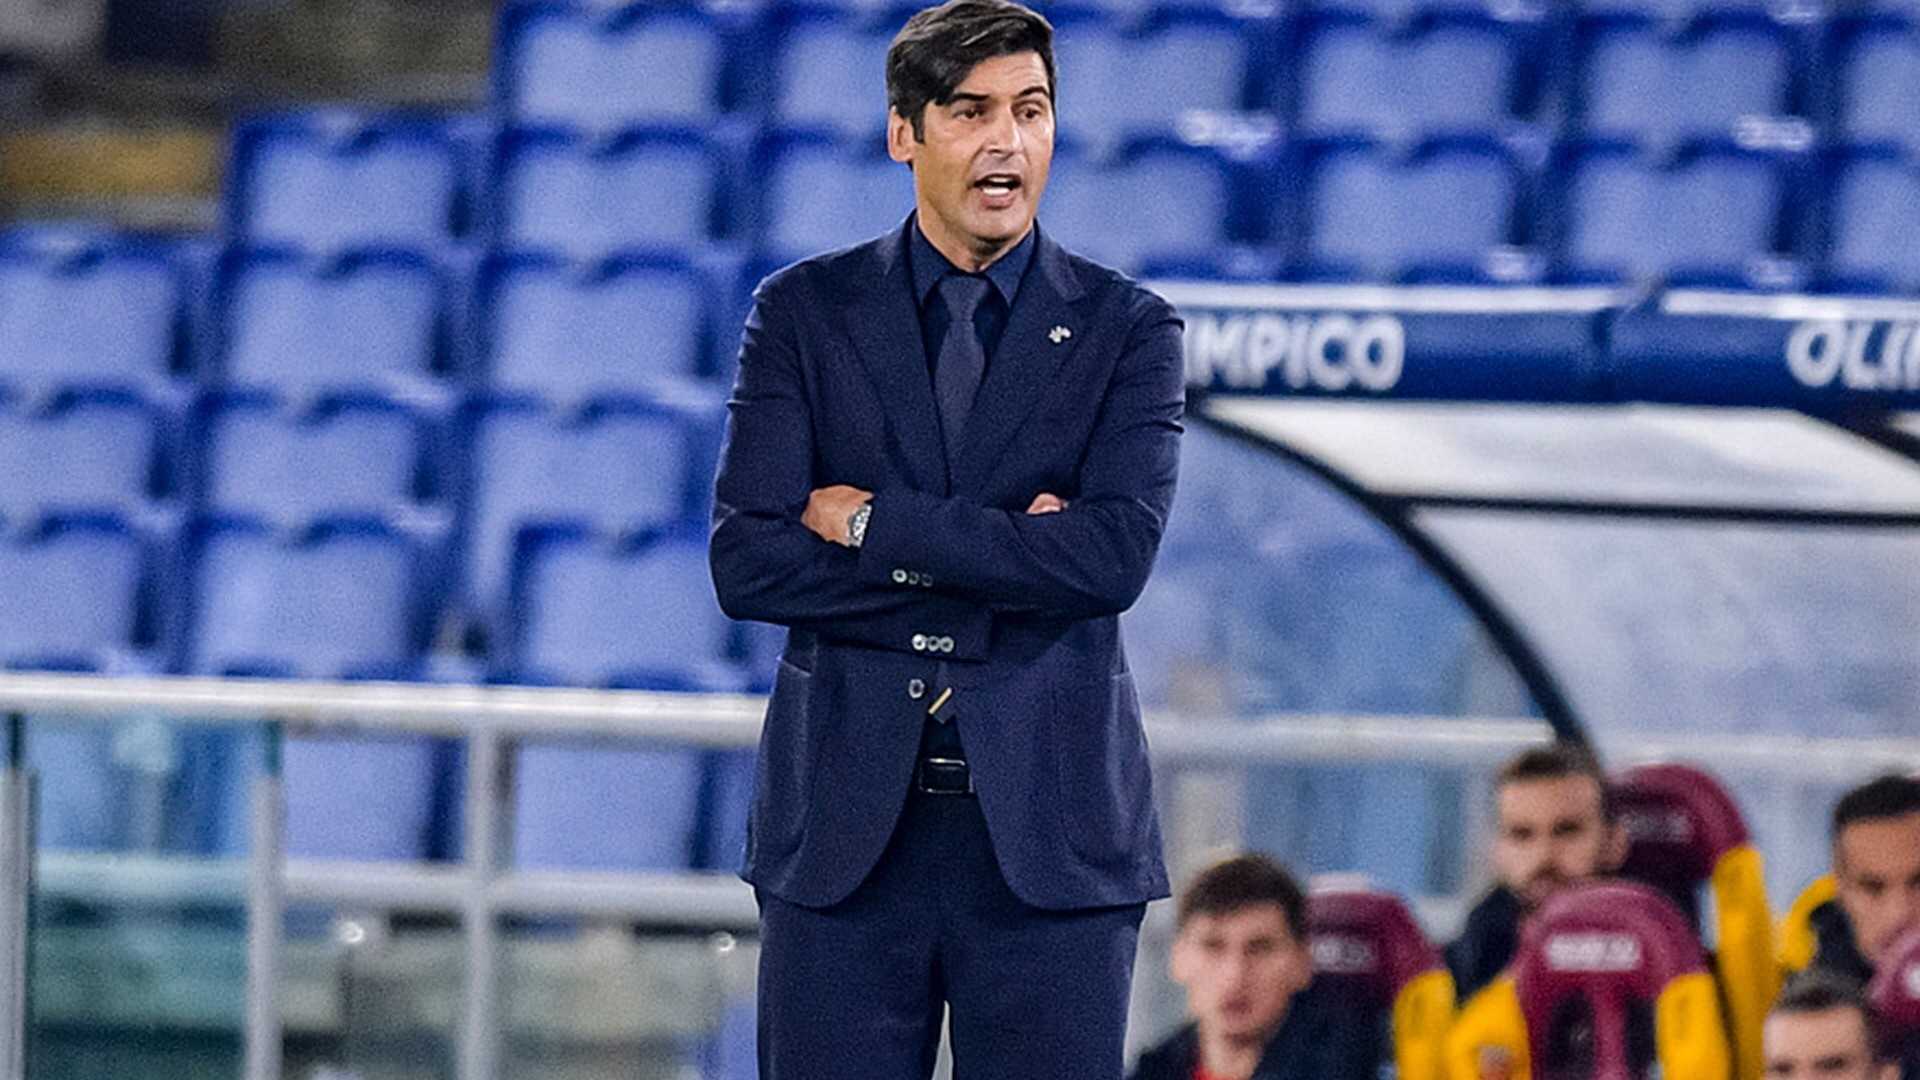 Paulo Fonseca is very highly rated as a manager despite being recently sacked by Roma. (Image Credit: Twitter/@PFonsecaCoach)